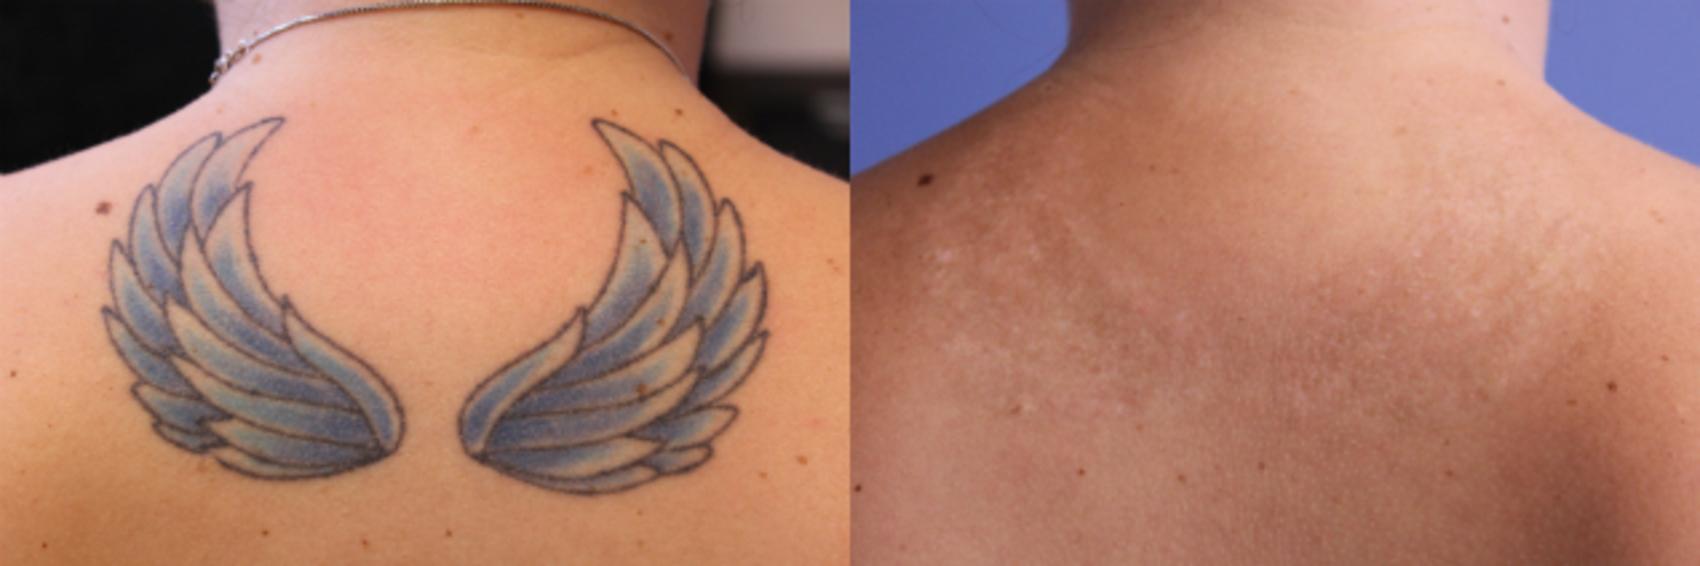 PicoSure Tattoo Removal vs PicoWay Tattoo Removal | Removery